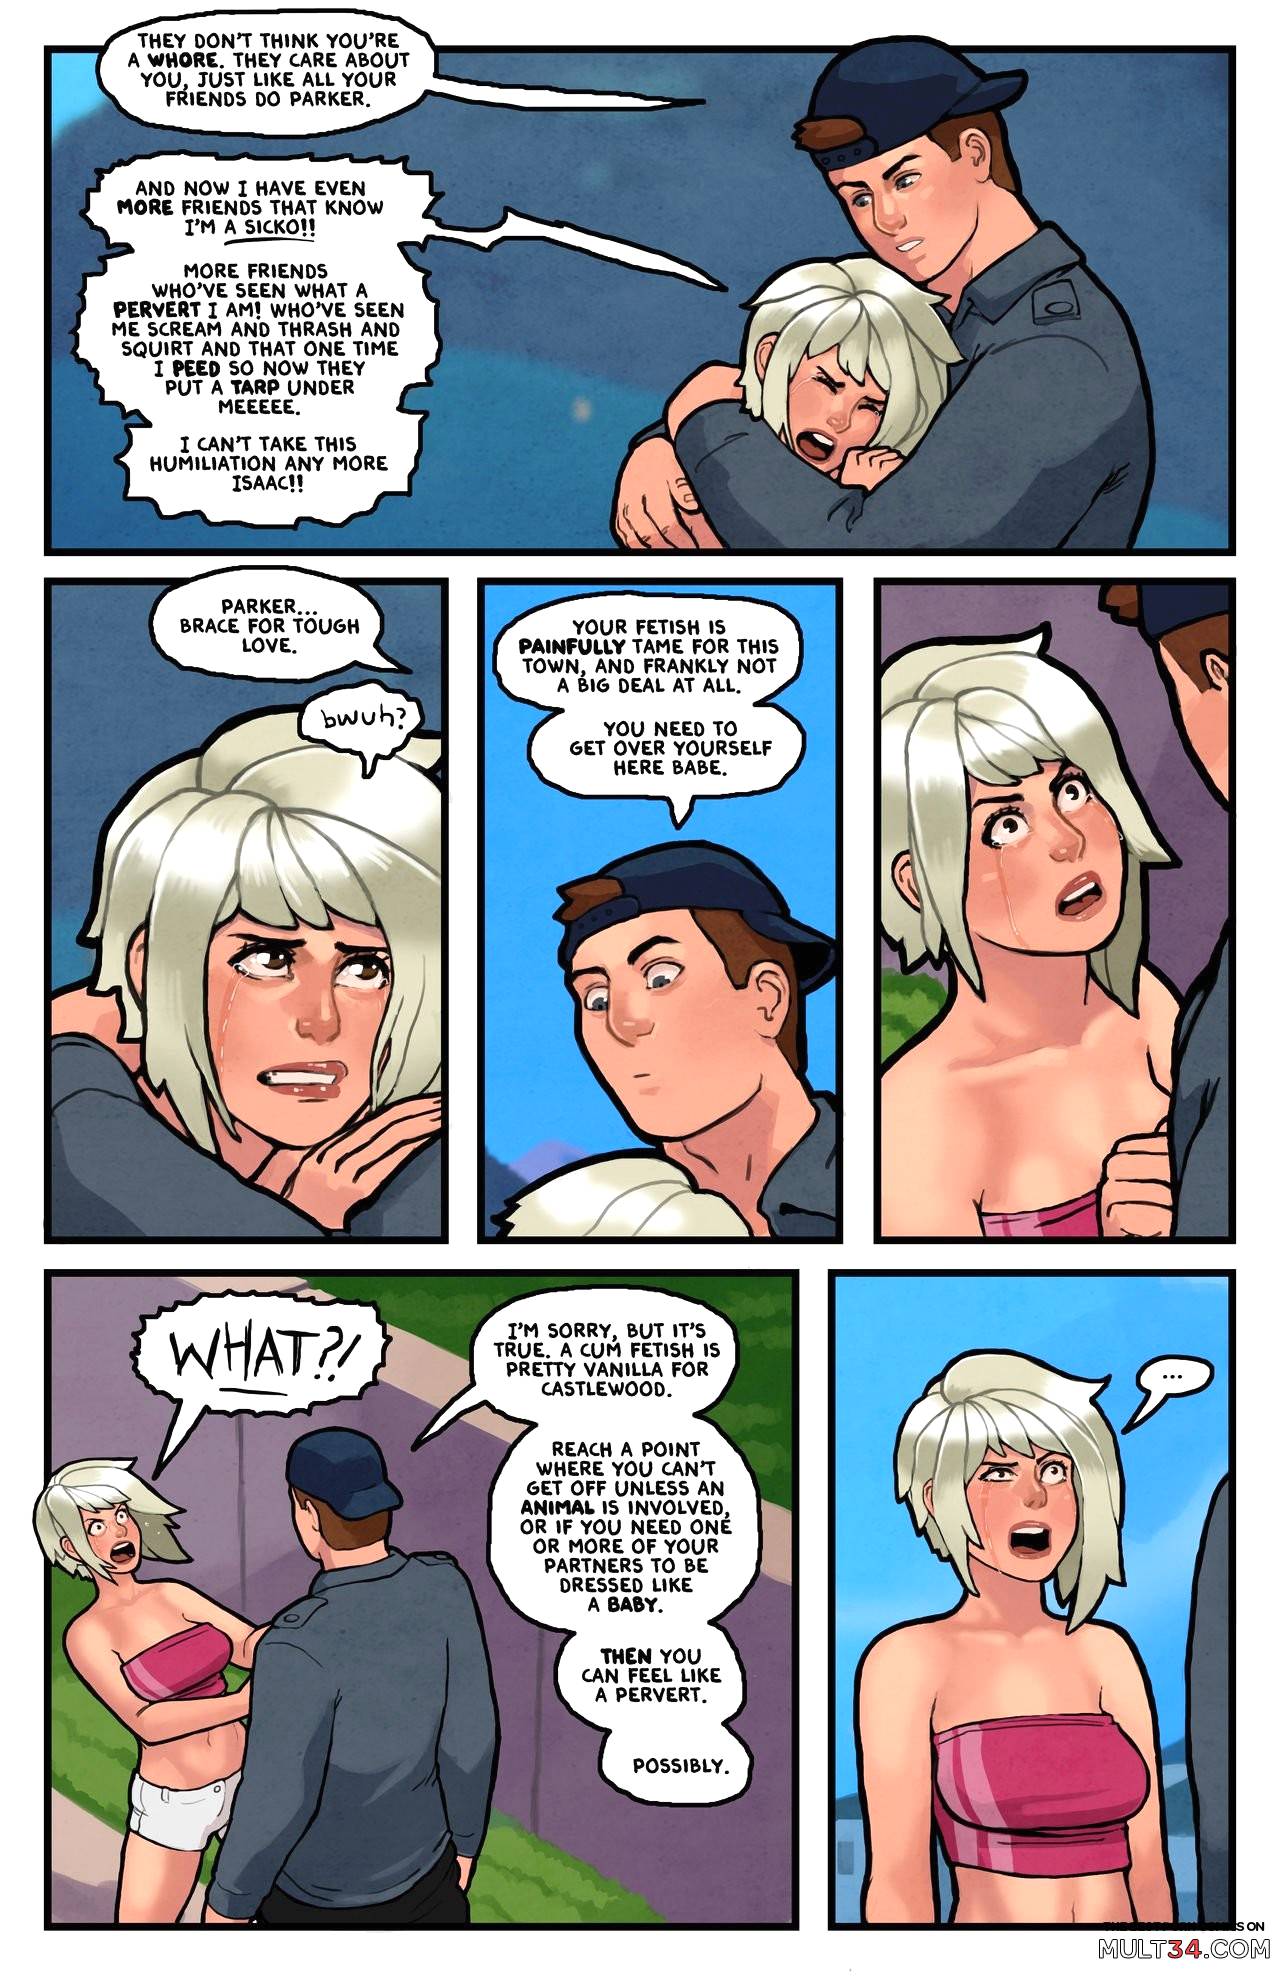 This Romantic World 6 page 12